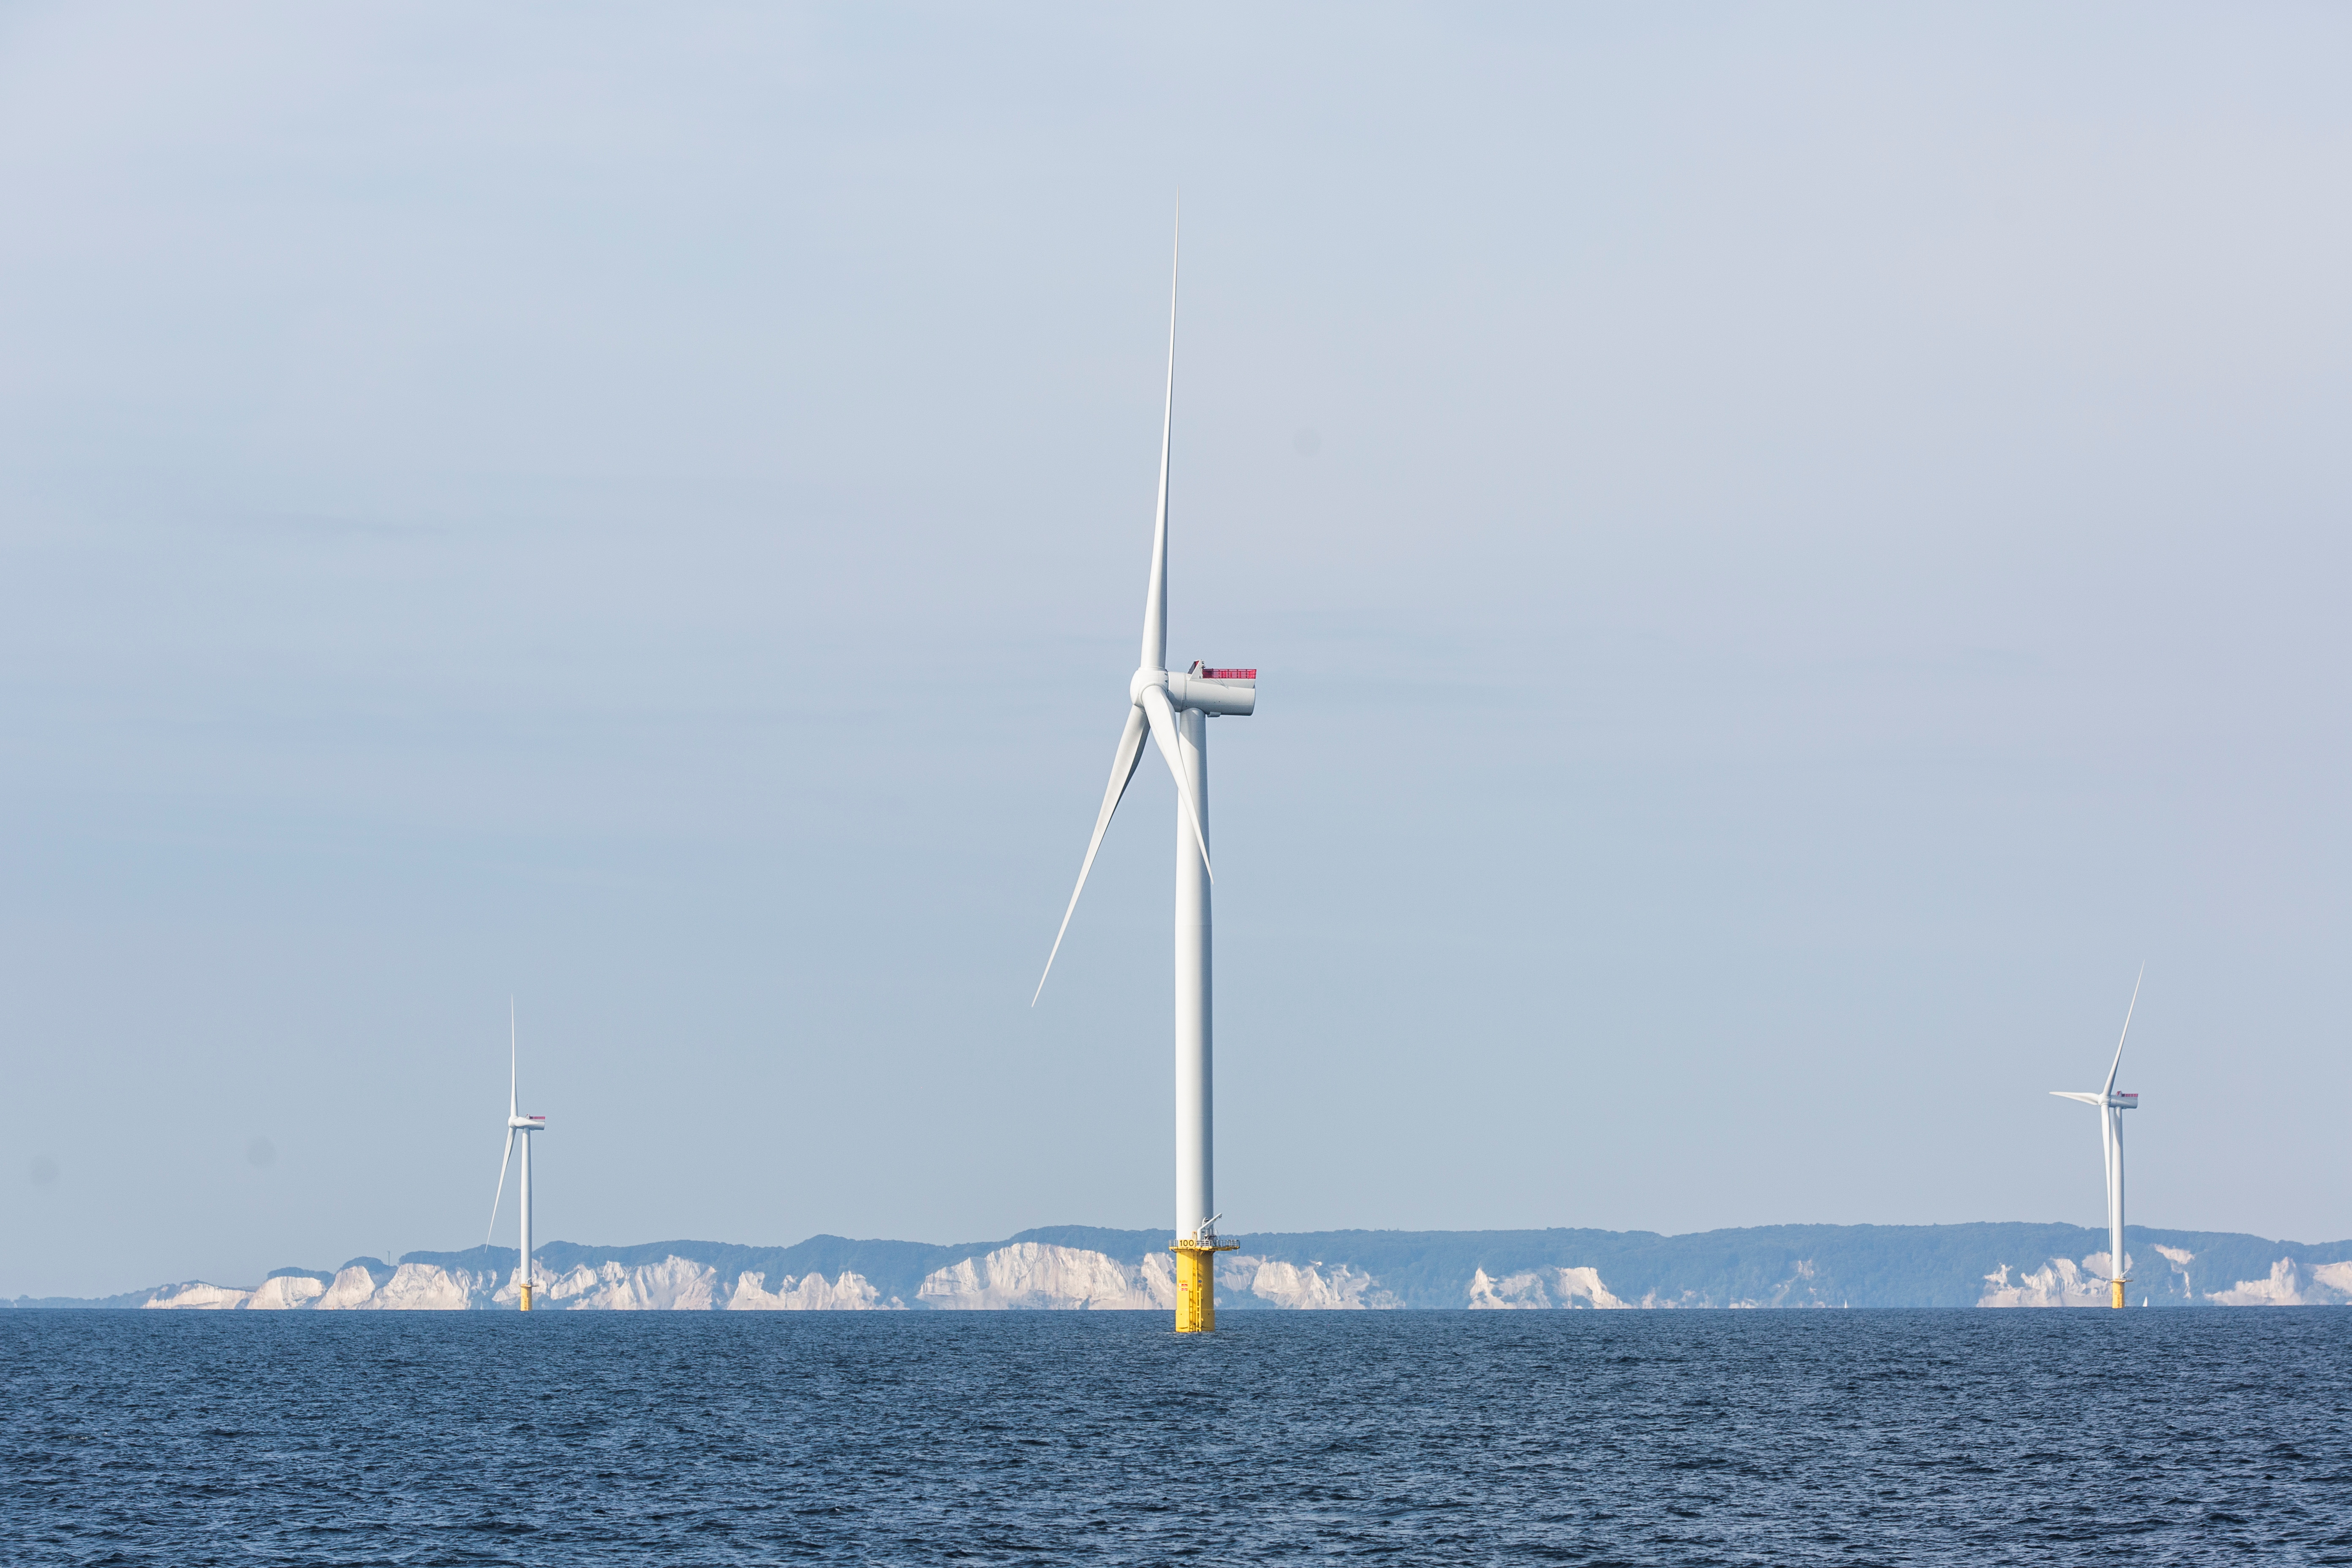 Power-generating windmill turbines are seen at an offshore wind farm in the Baltic Sea